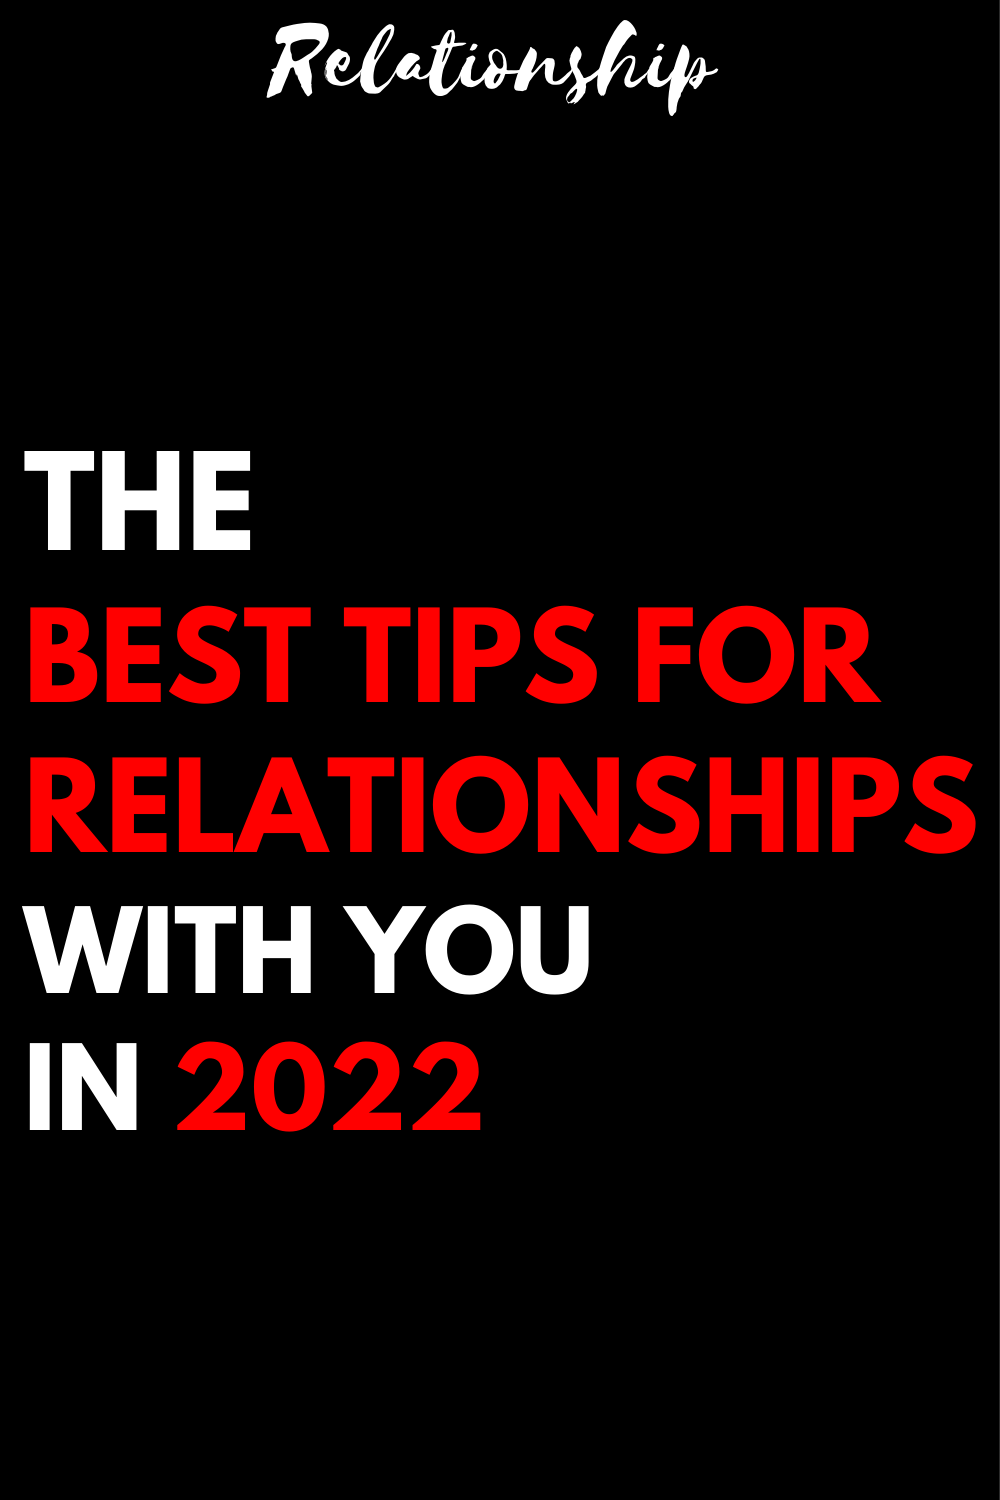 The best tips for relationships with you in 2022